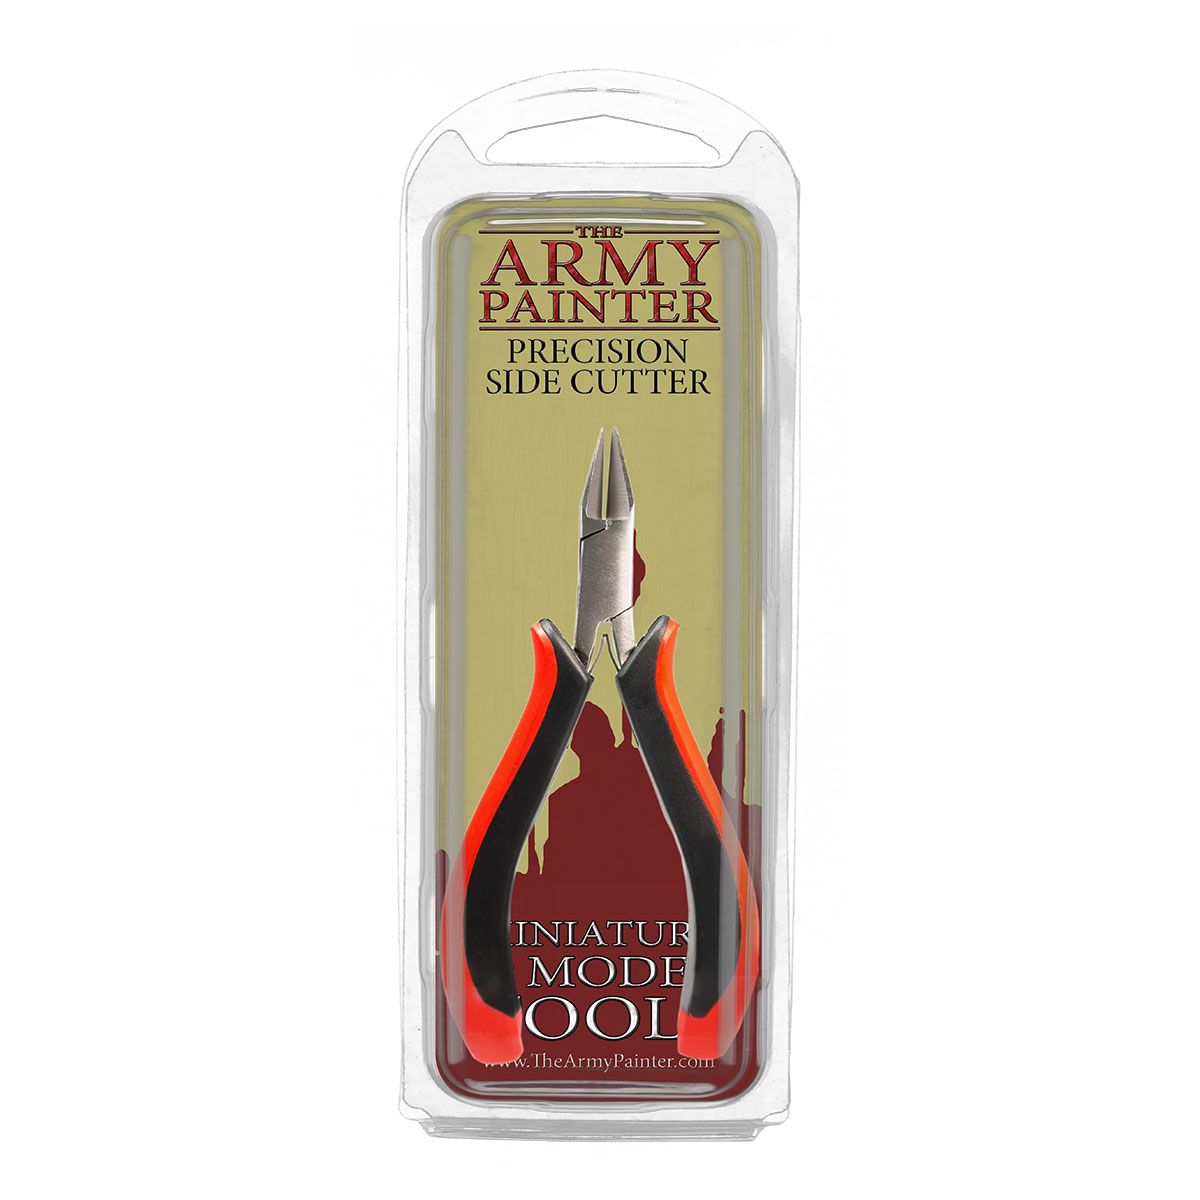 PRECISION SIDE CUTTER - TL5032 - The Army Painter